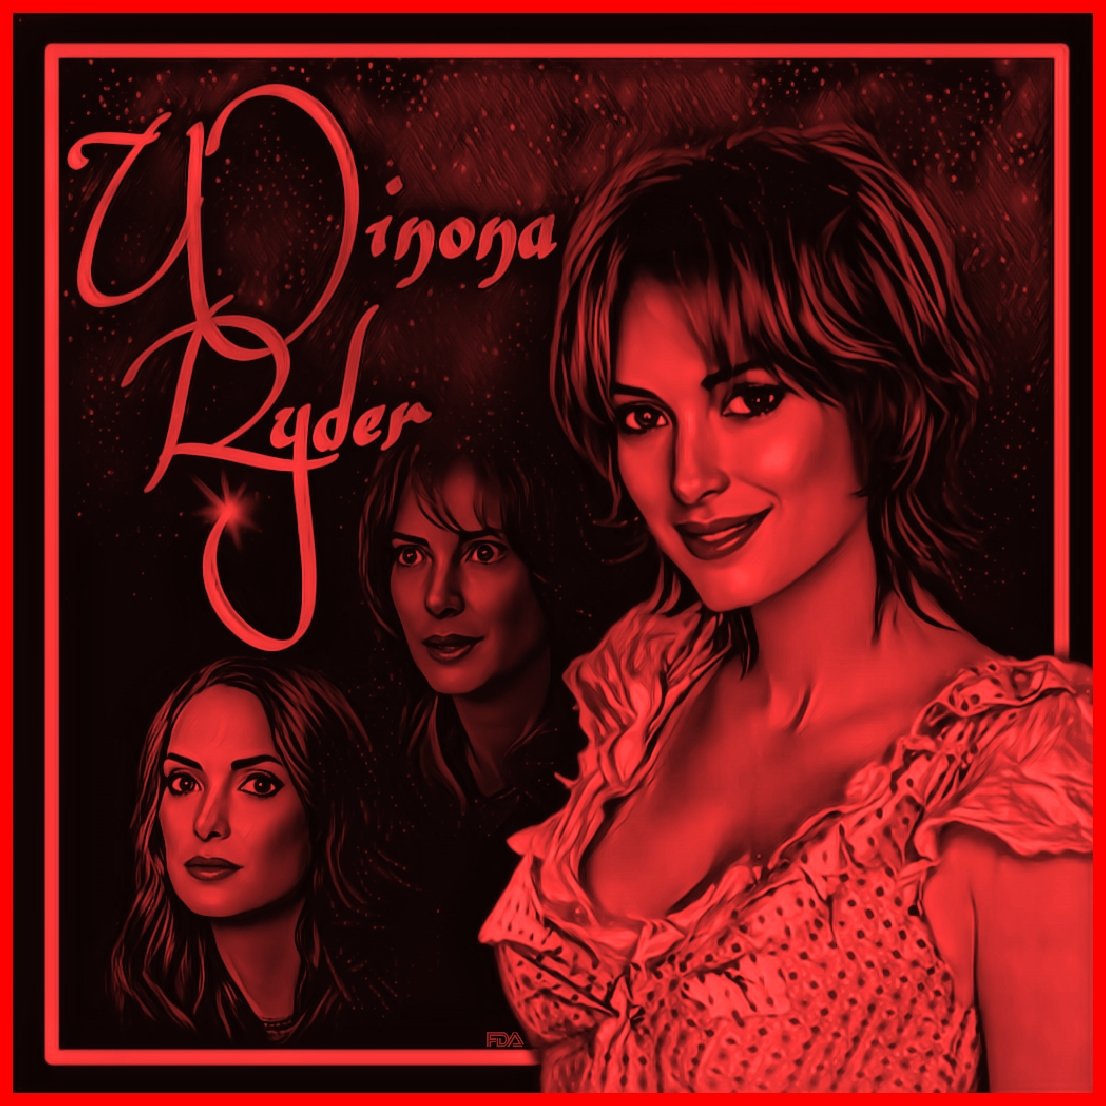 'Winona Ryder'
 All In Neon Red.....
#JoyceByers
#joycebyersedit
#WinonaRyder 
#winonaryderedit
#amazingactress

By #FreshDripArt 🙏🏻✌🏼😊❤